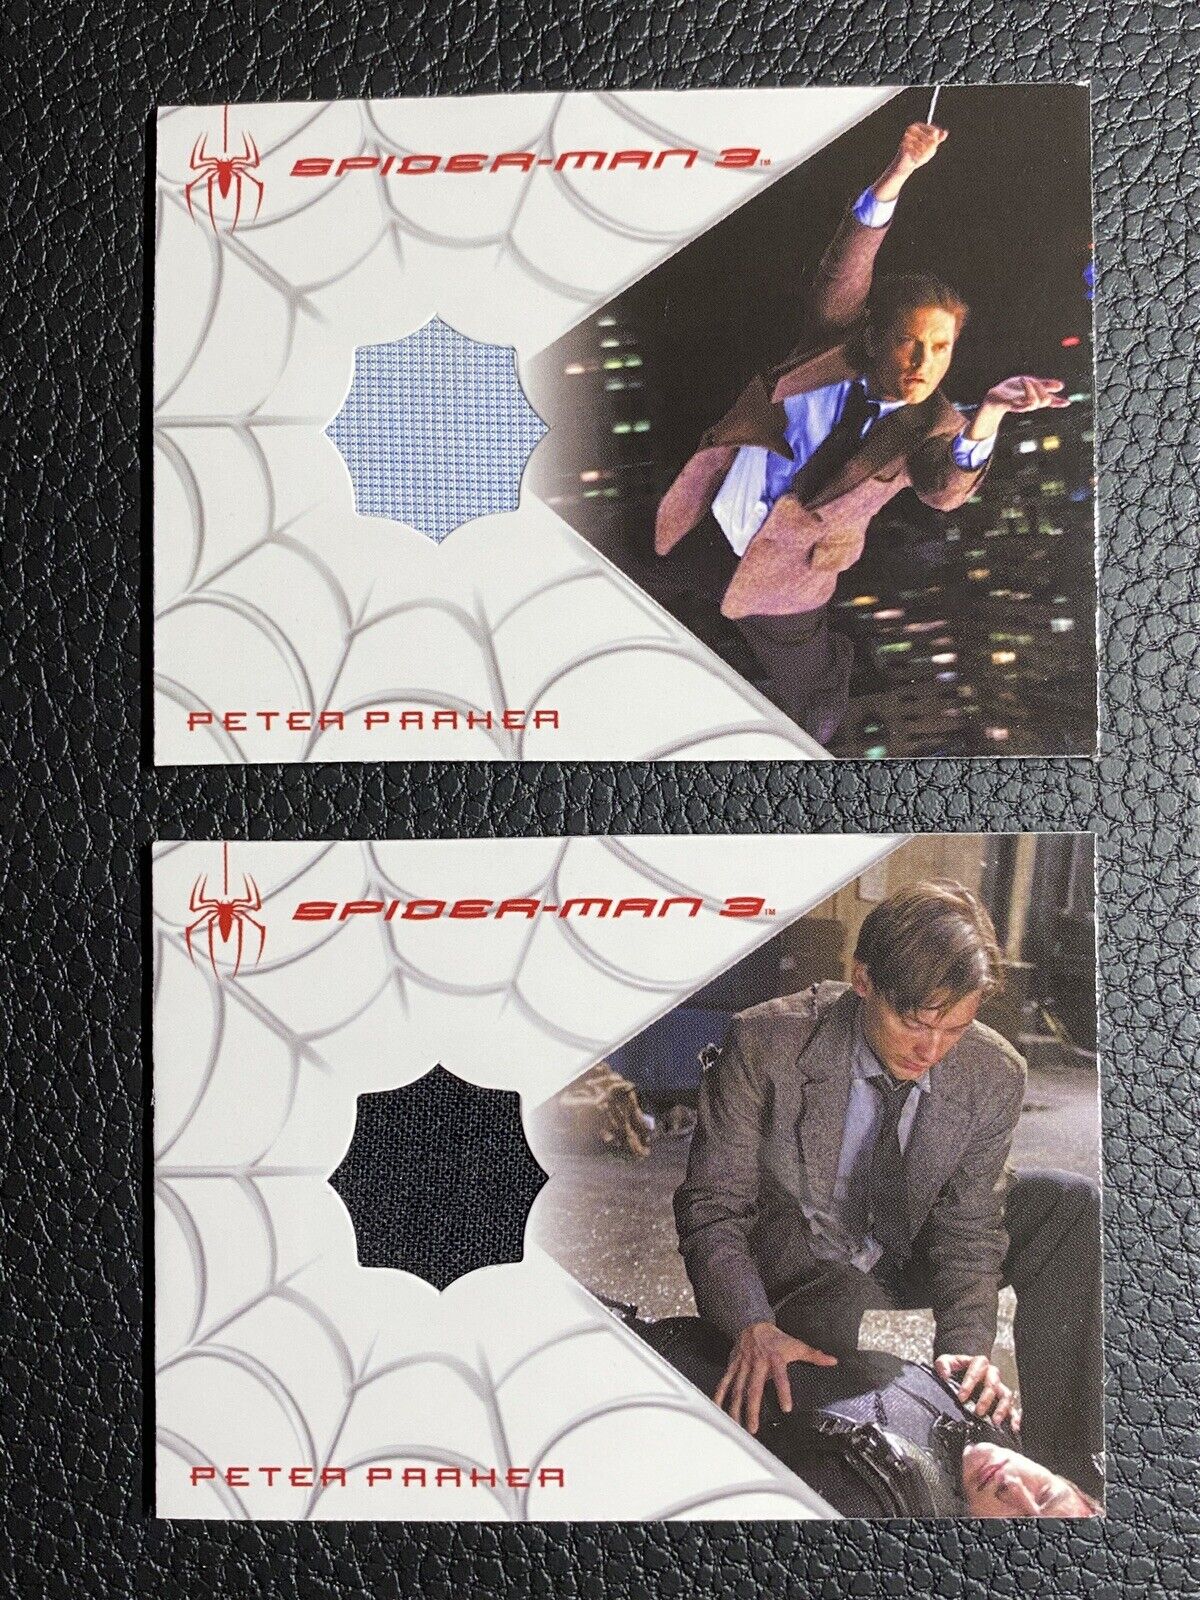 2007 Spider-Man 3 TOBEY MAGUIRE Costume Material Cards Rittenhouse